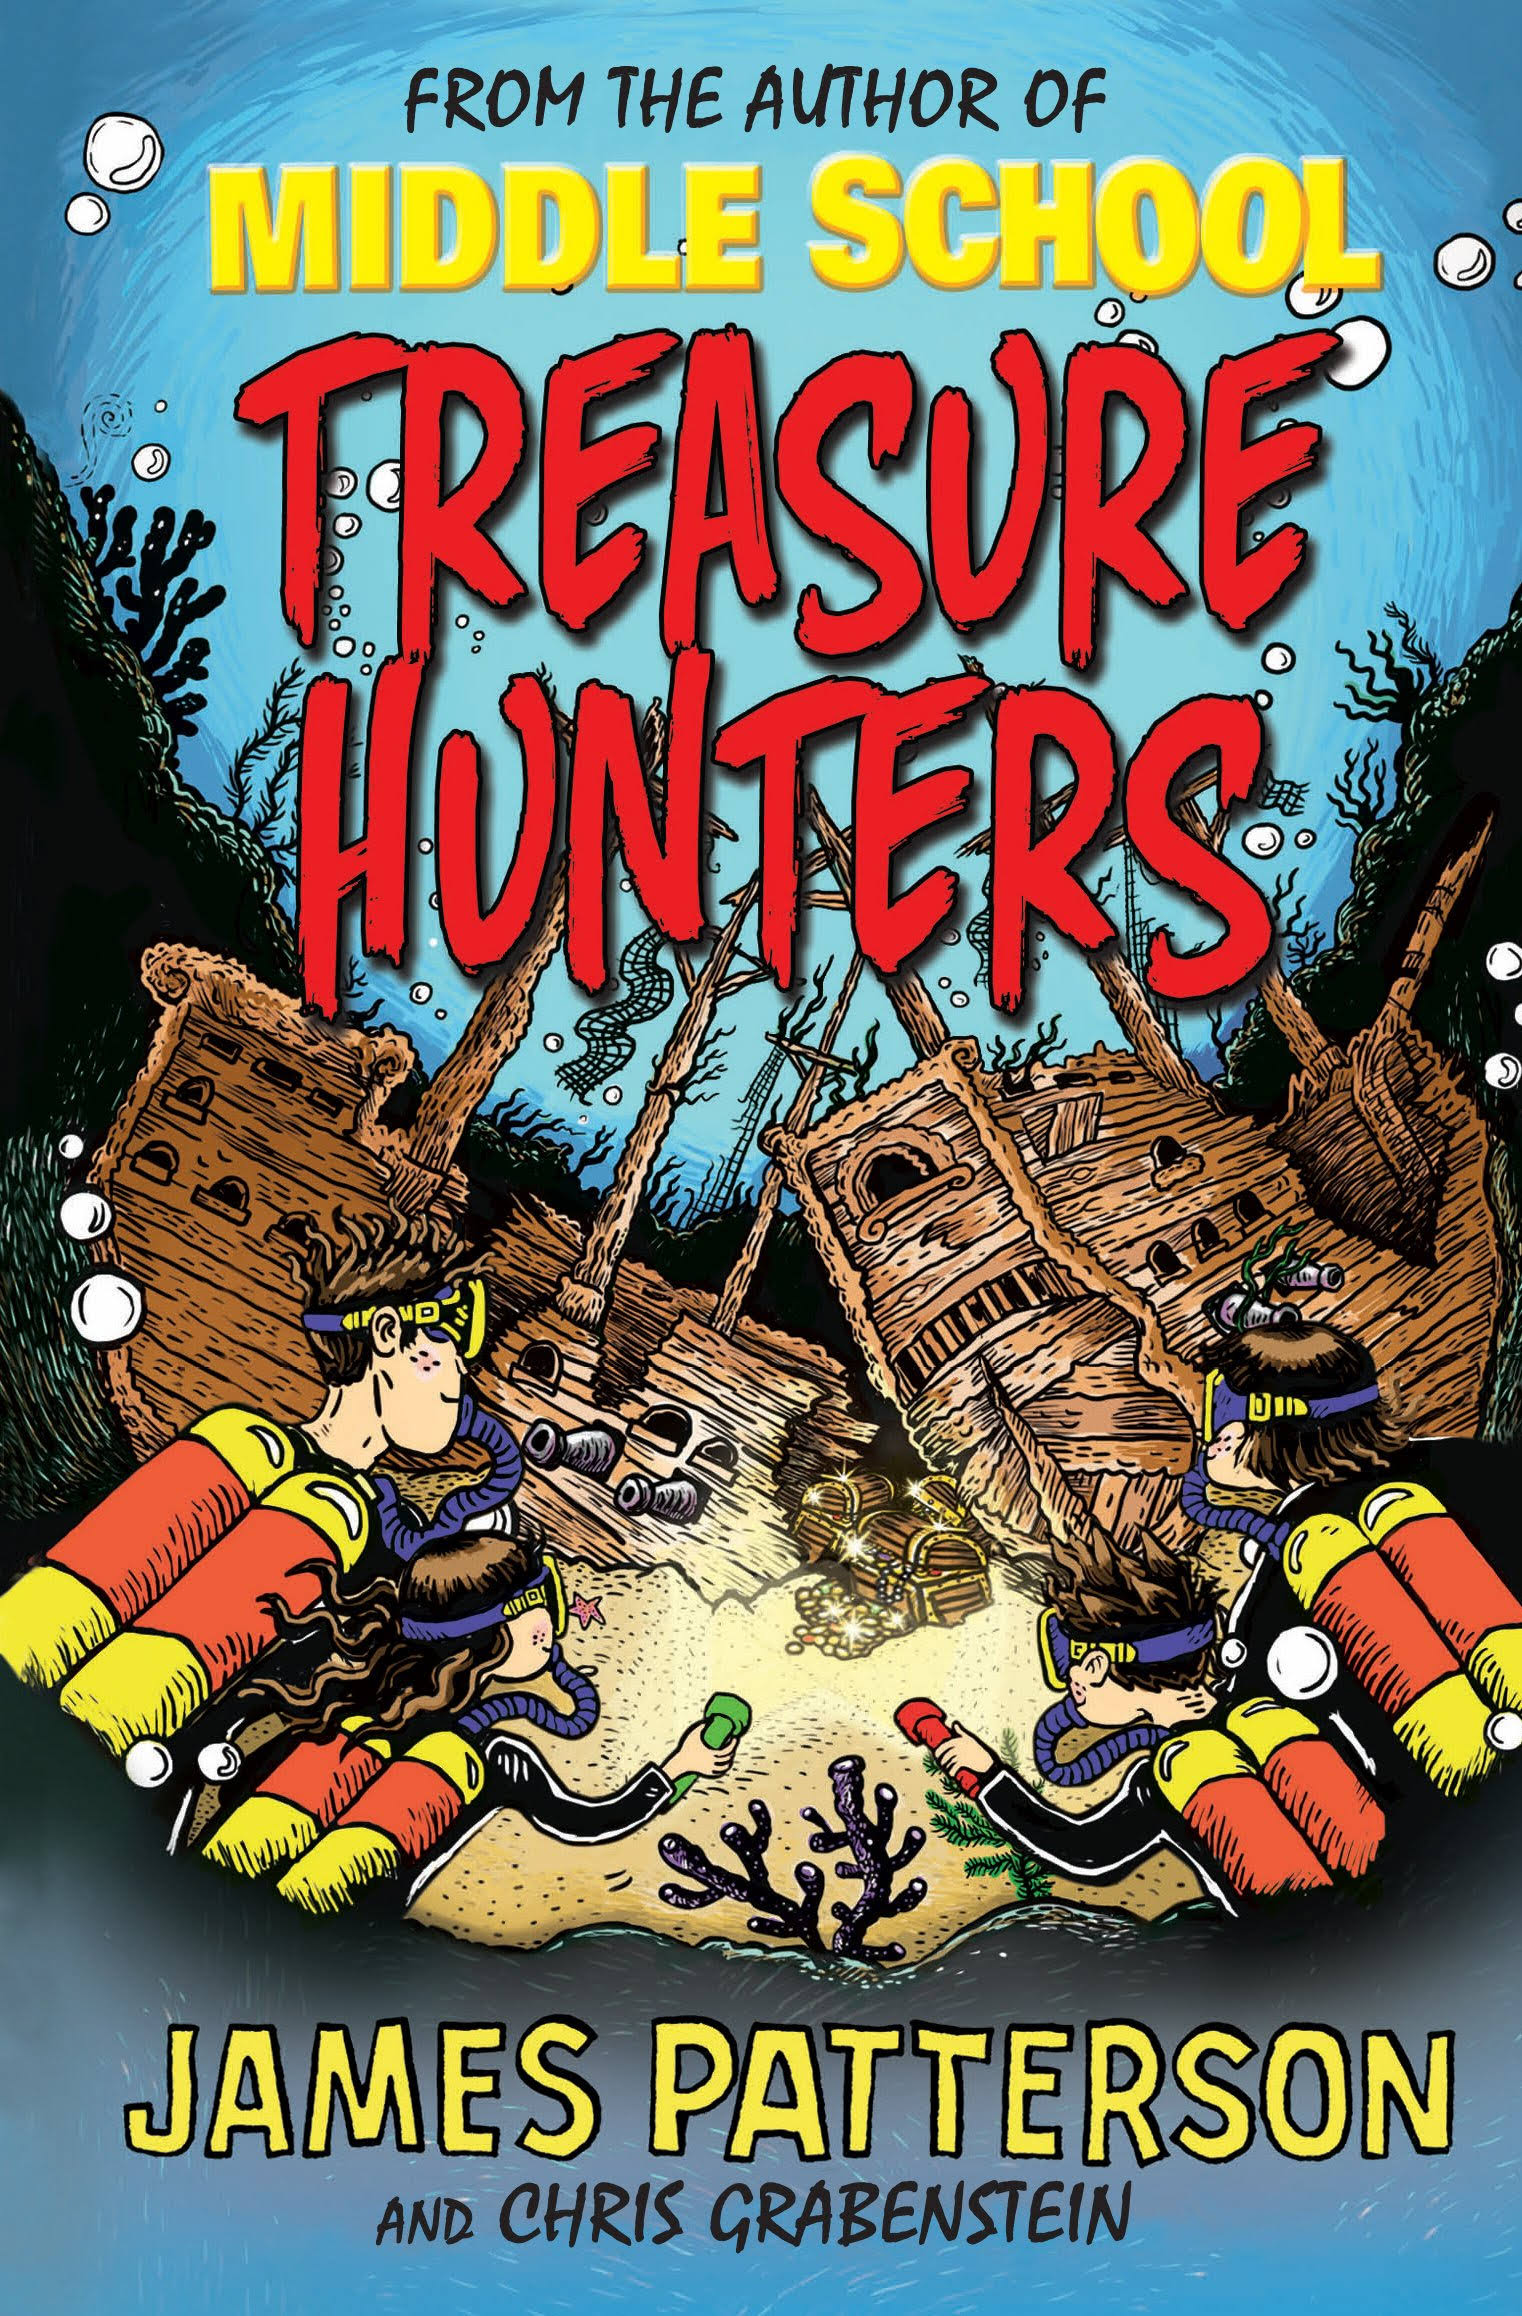 Treasure Hunters by James Patterson